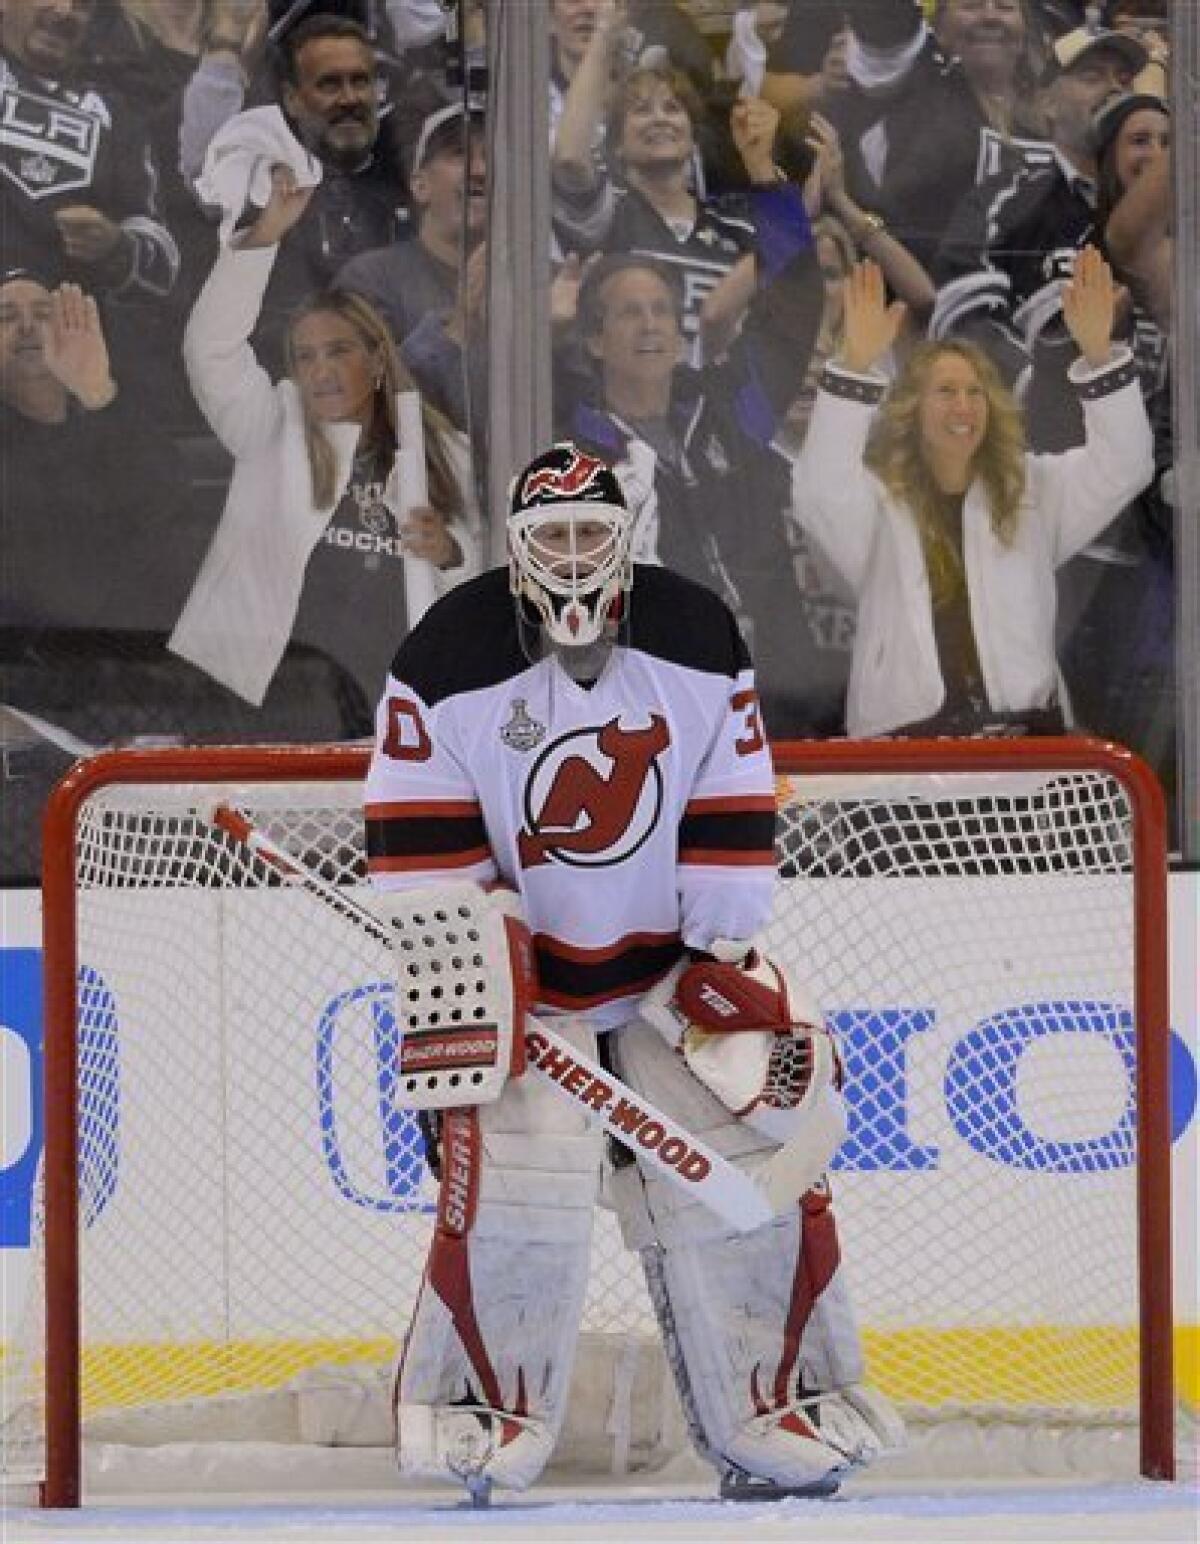 New Jersey Devils Martin Brodeur reacts after Adam Henrique scores the game  winning goal in overtime against the New York Rangers in game 6 of the  Eastern Conference Finals of the Stanley